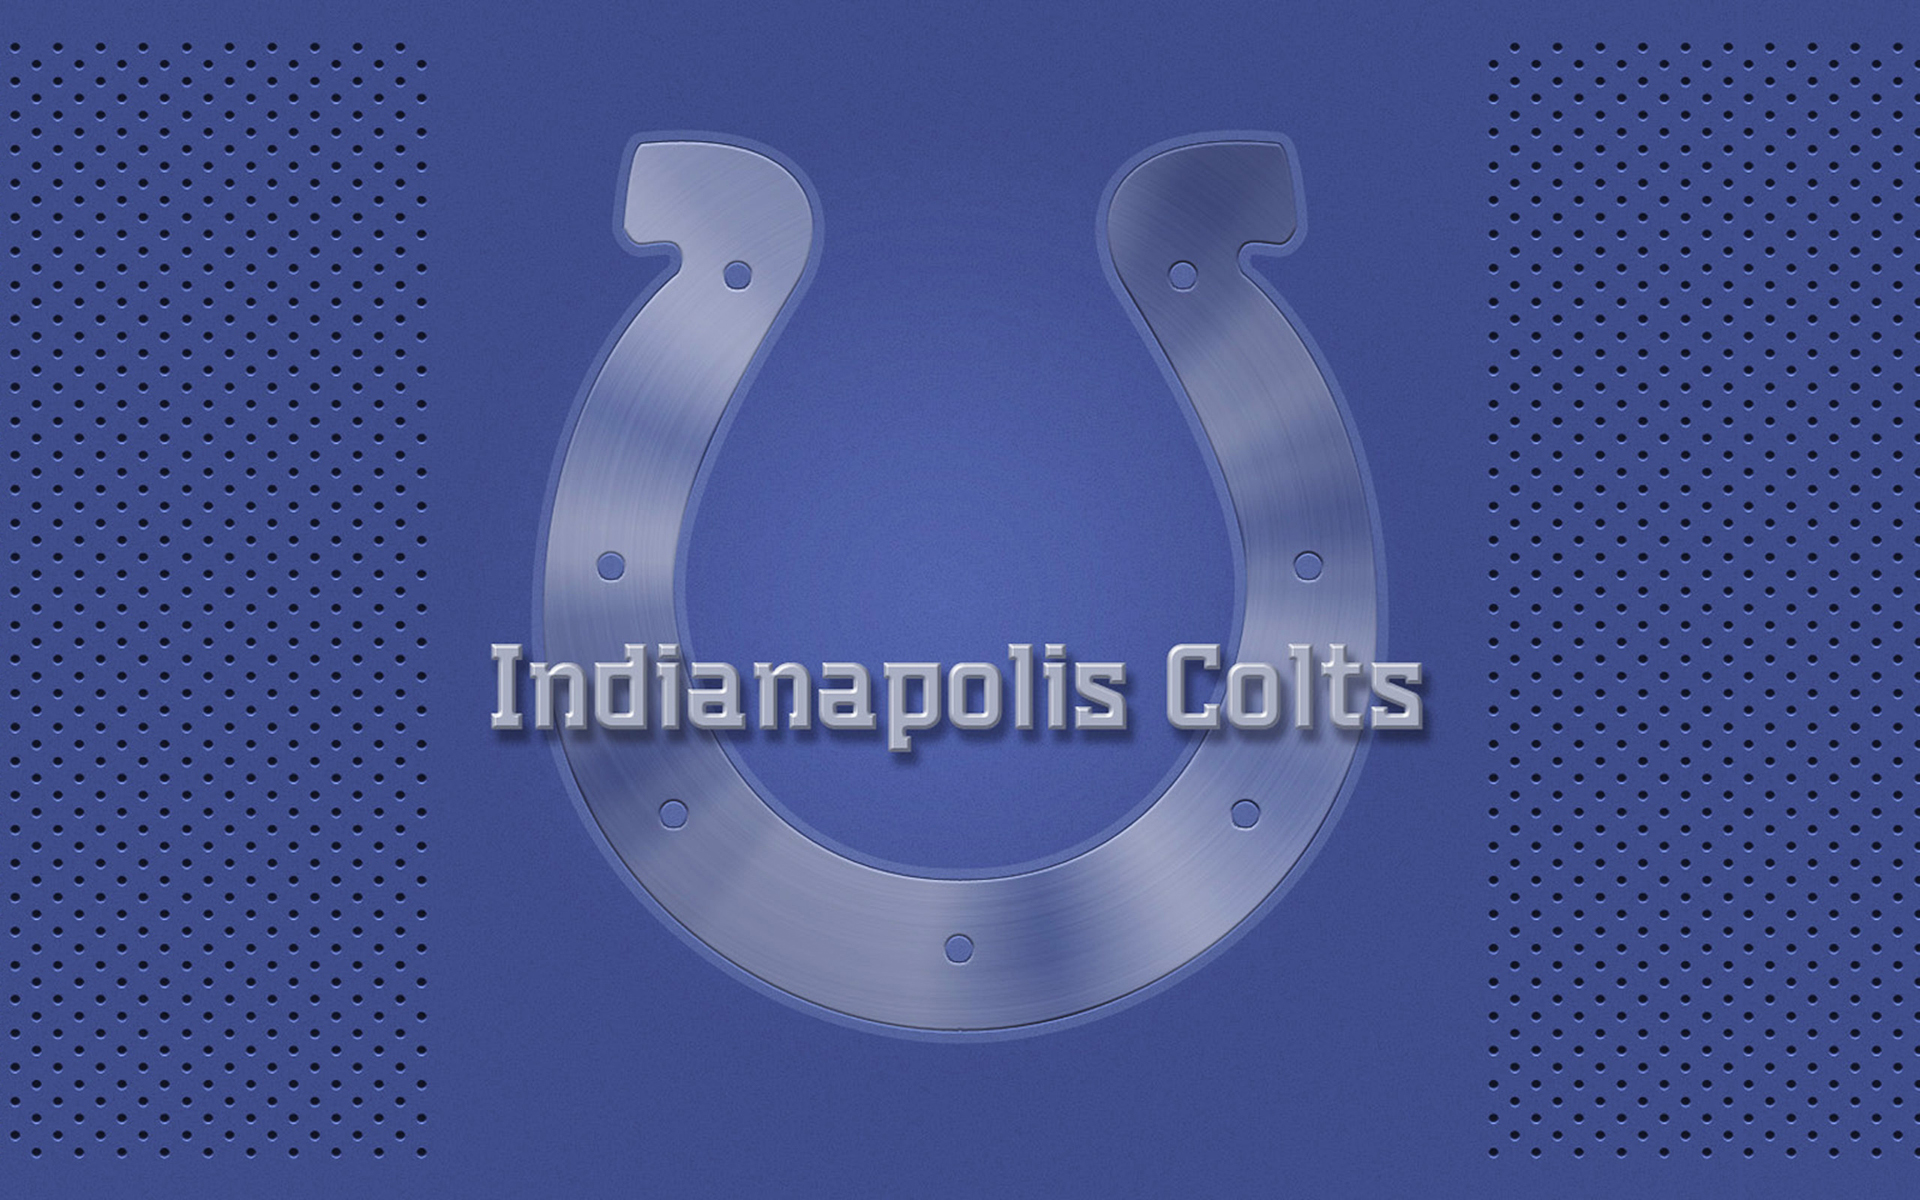 Indianapolis Colts Wallpaper Nfl Cool Wallpapers Hd - Indianapolis Colts - HD Wallpaper 